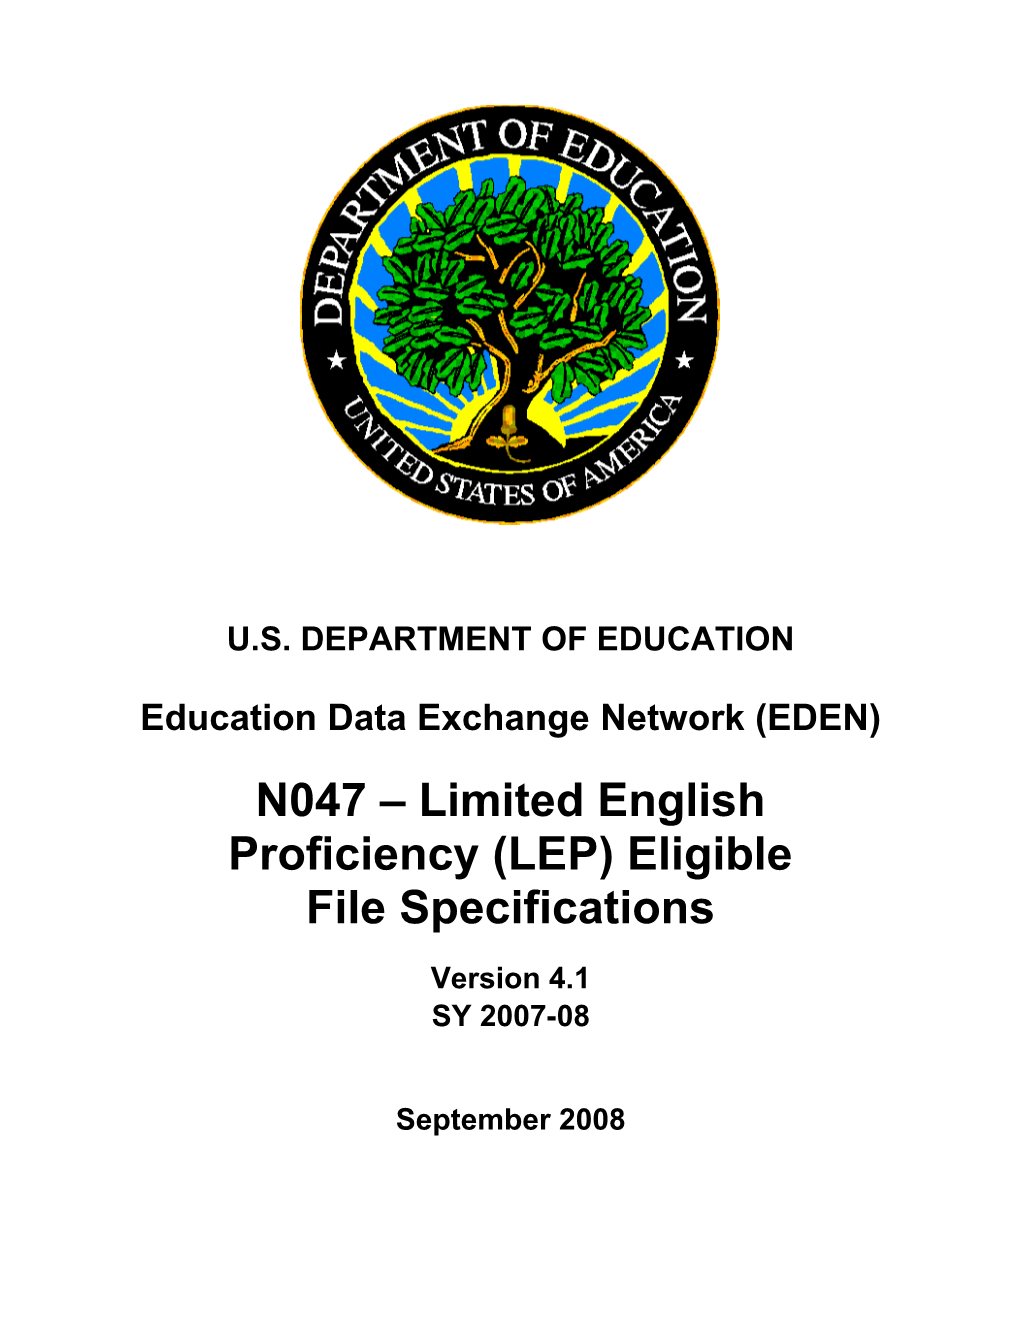 Limited English Proficiency (LEP) Eligible File Specifications Version 4.1 (MS Word)